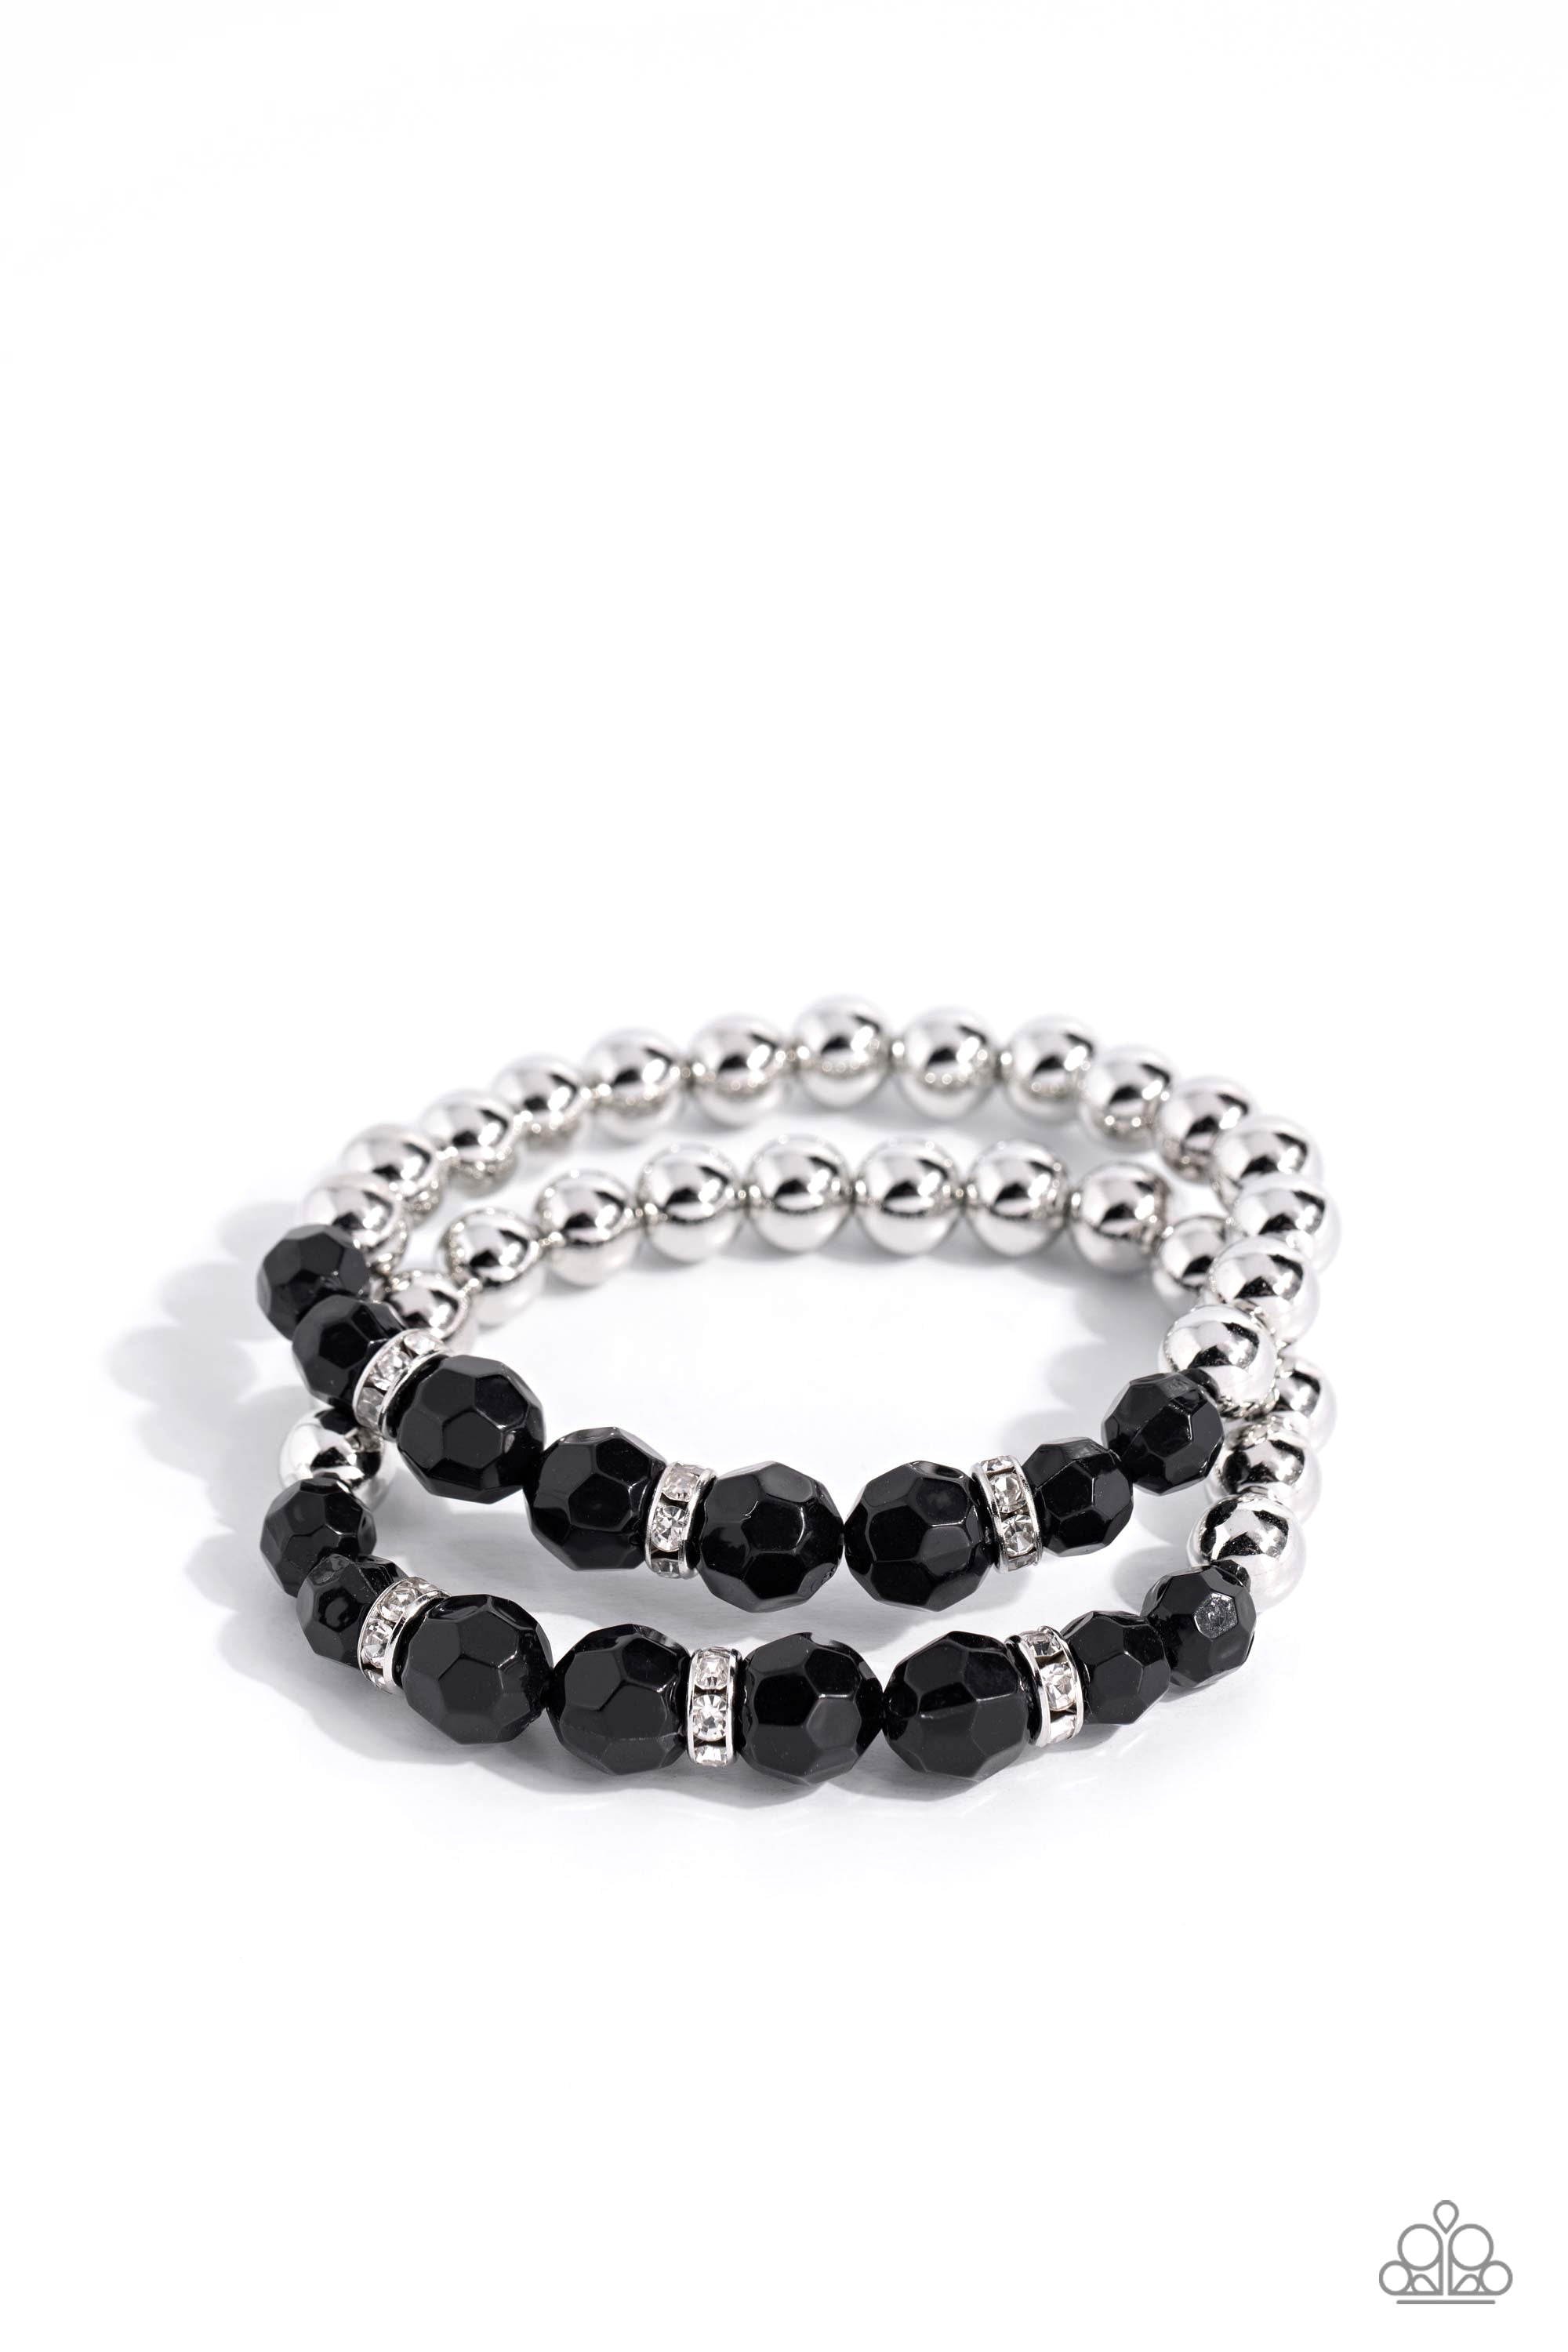 Black and White Bracelet with 8 Infused Beads